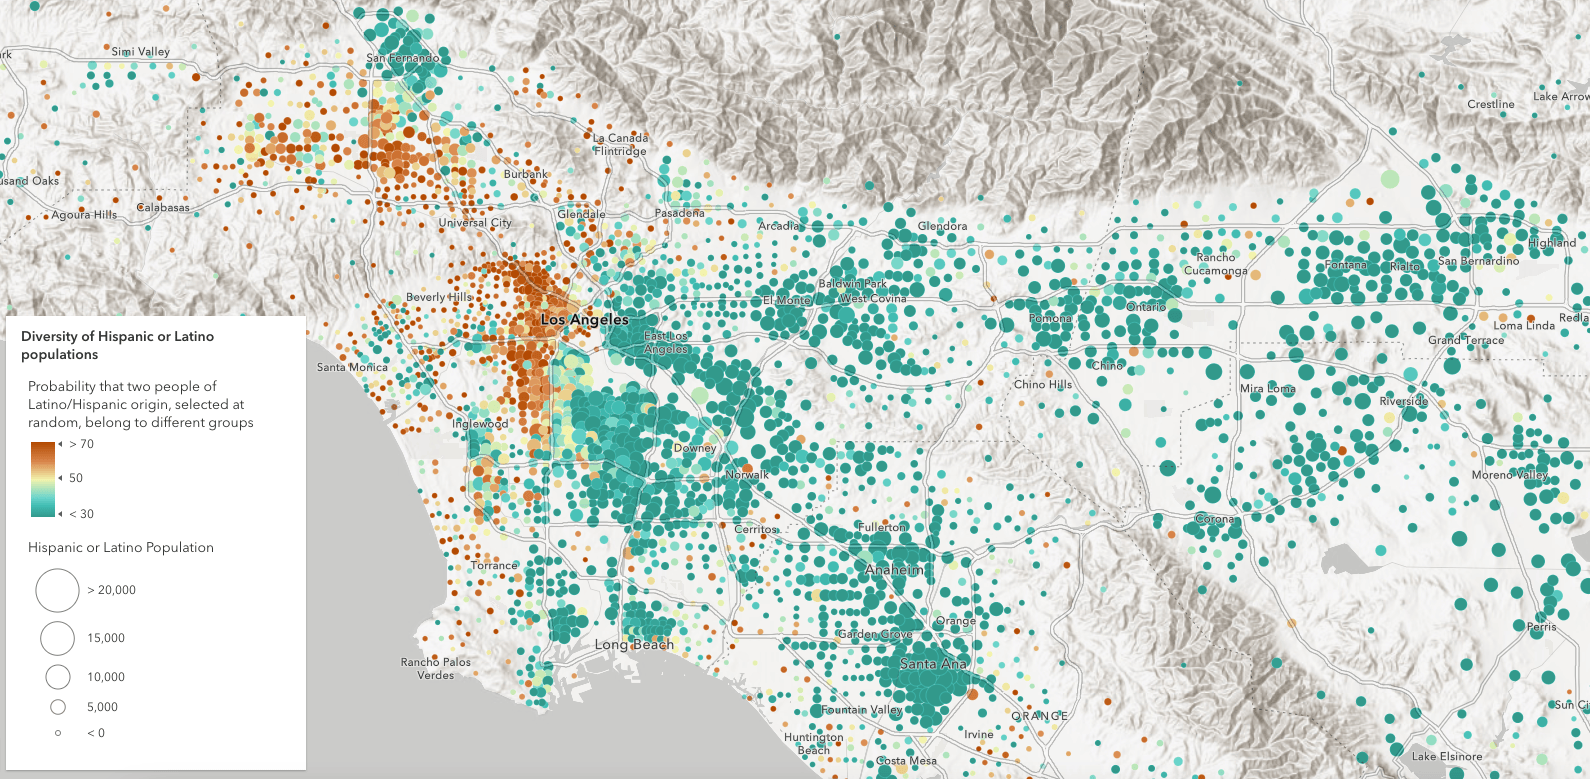 Diversity of specific Hispanic/Latino groups in southern California.